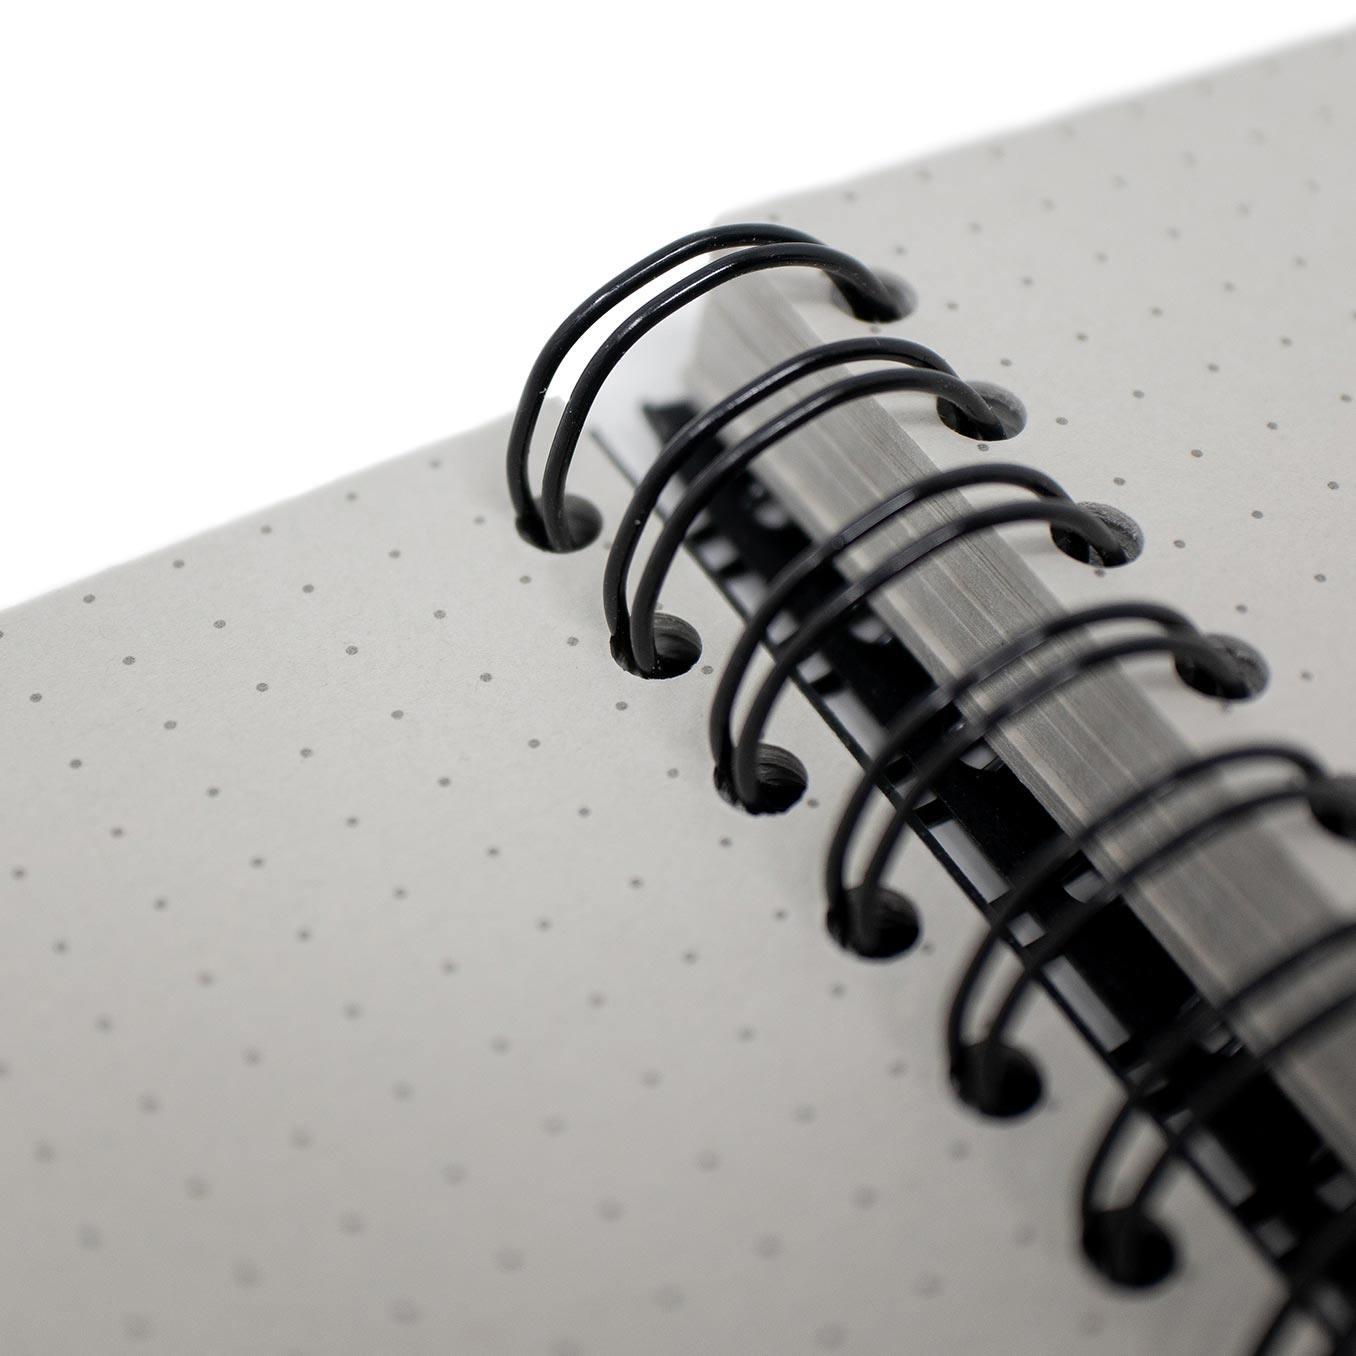 A5 Dot Grid Notebook - Grey Pages - Dotgrid